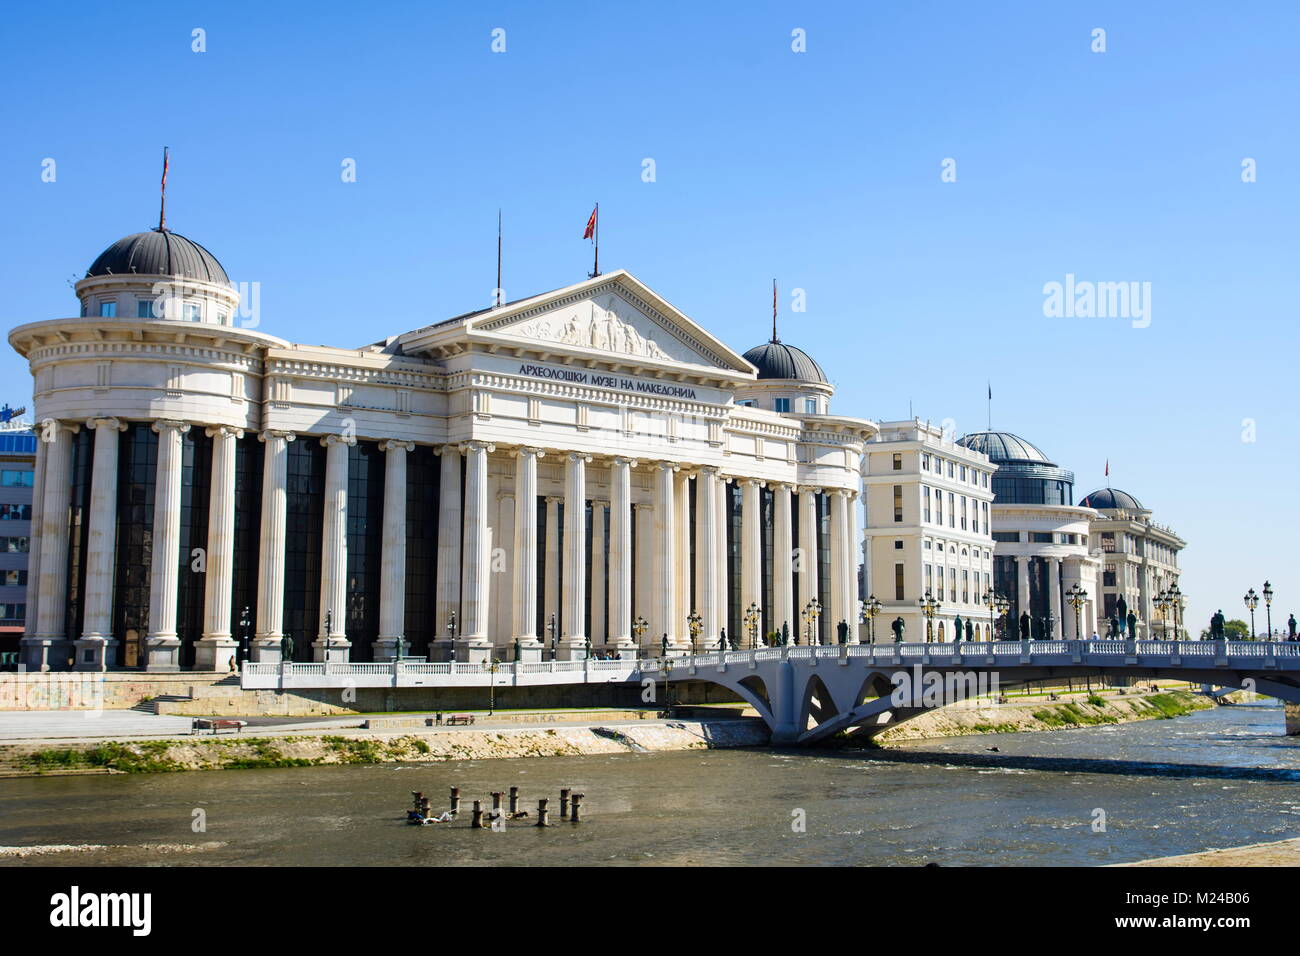 SKOPJE, MACEDONIA - OCTOBER 12, 2017: Macedonia square in Skopje city with Archeological museum and monuments on a sunny day Stock Photo